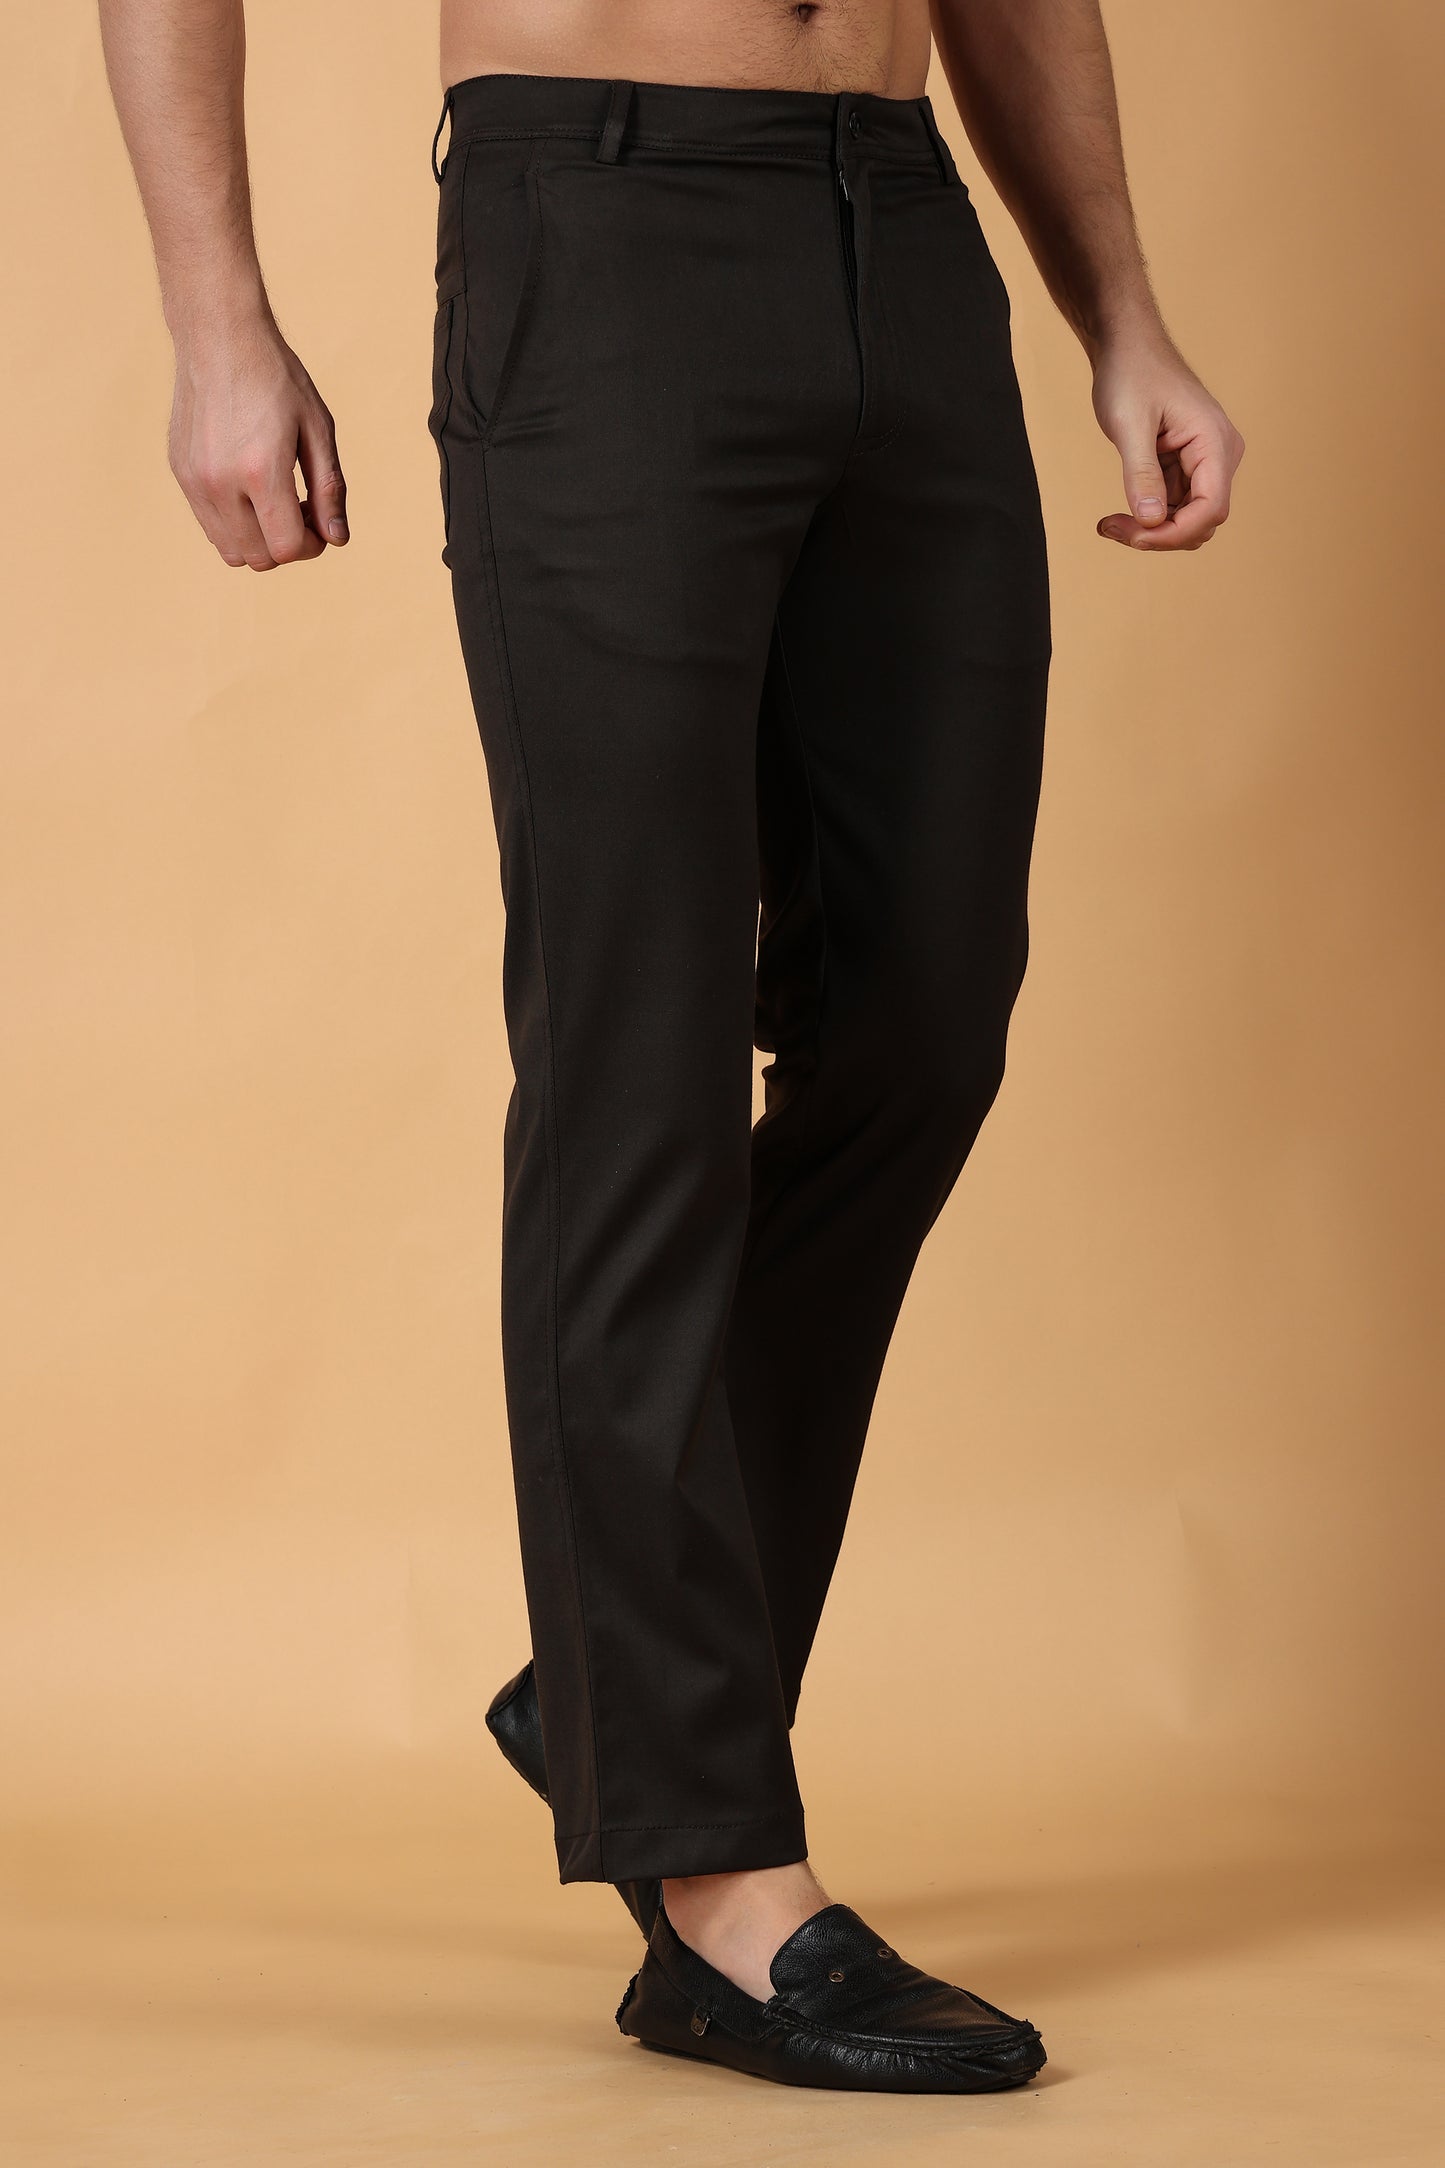 Chinos For Men